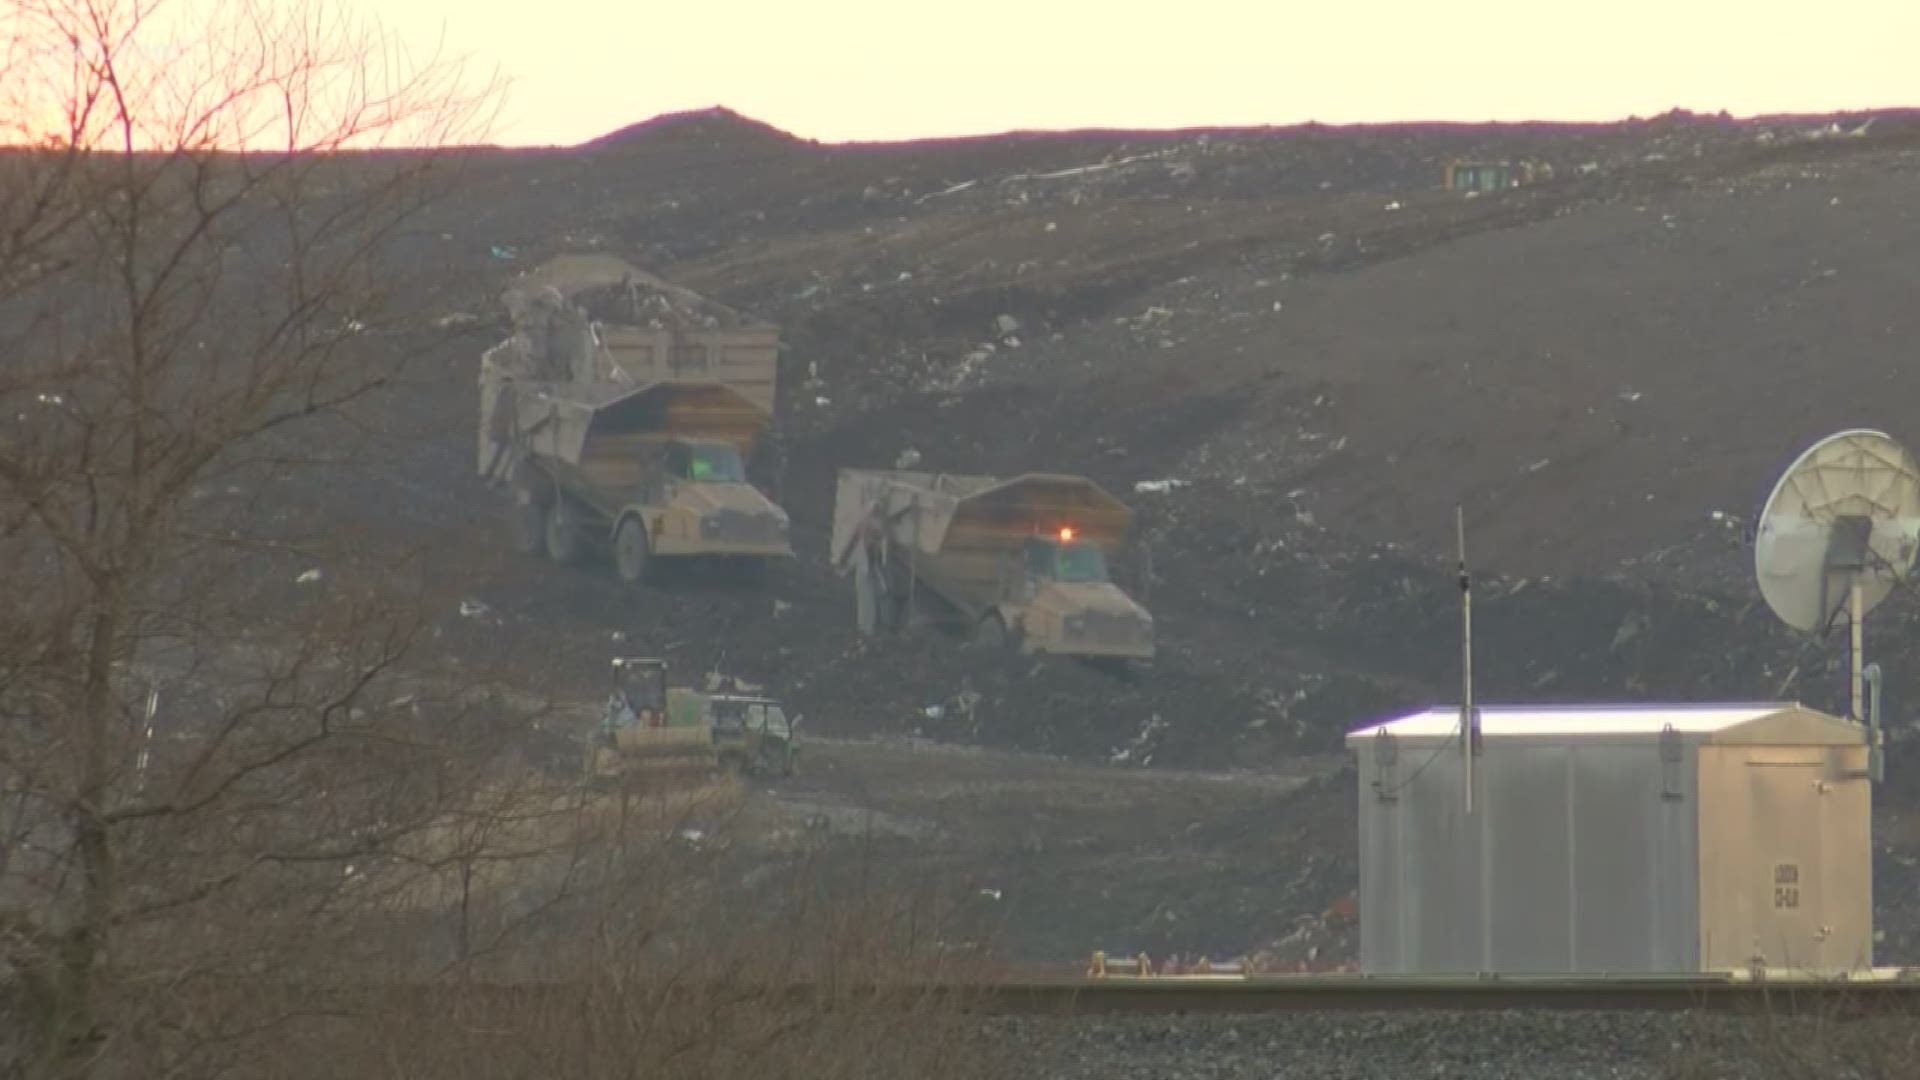 Sulfur dioxide is a toxic gas that the Ohio Environmental Protection Agency is saying the landfill is exceeding the amount they are allowed to produce.